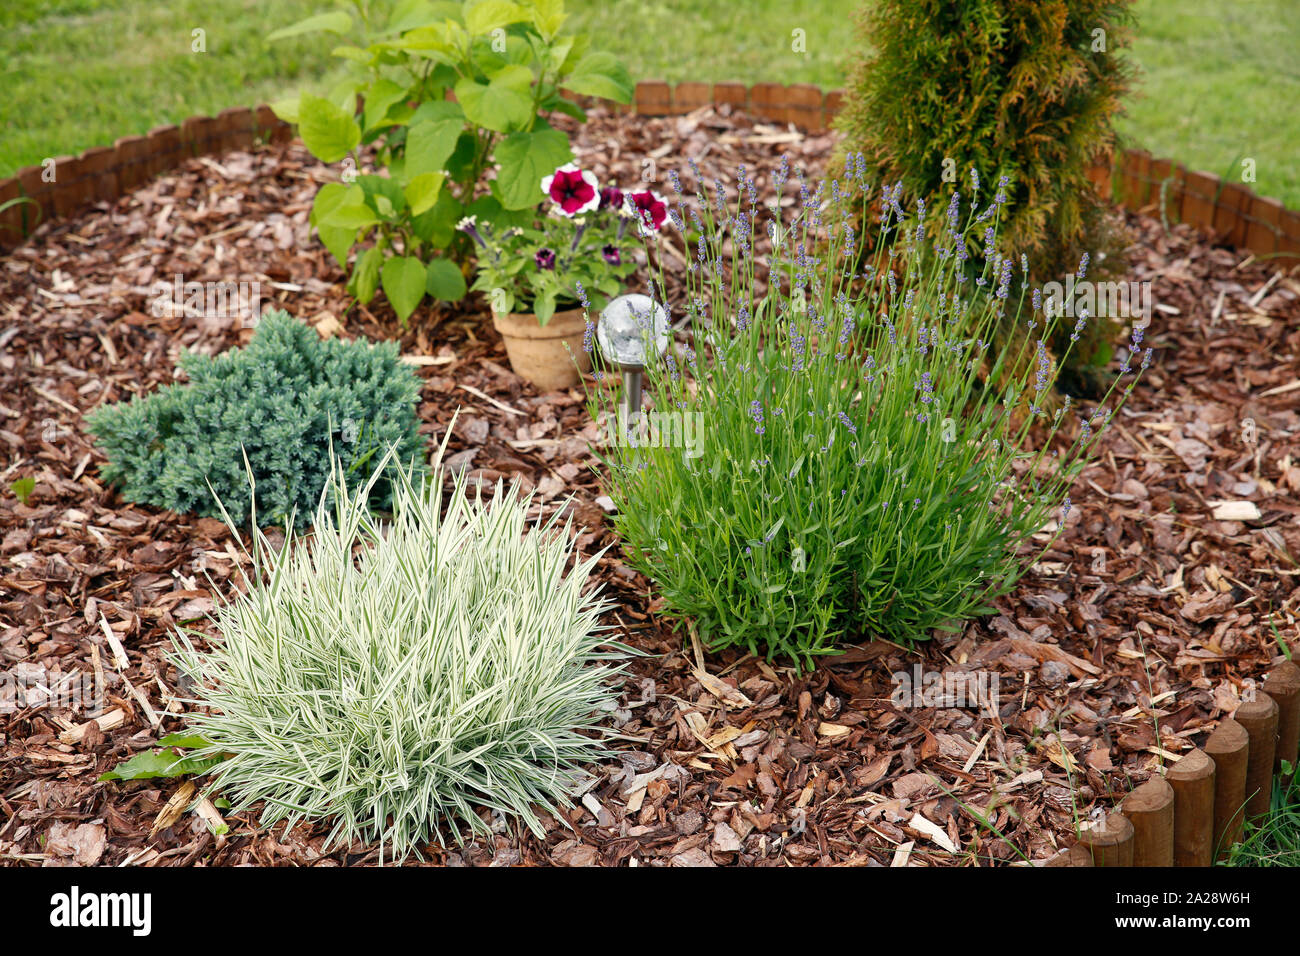 Flower bed with different flowers covered with bark mulch in summer. Solar lamp in the center. Stock Photo